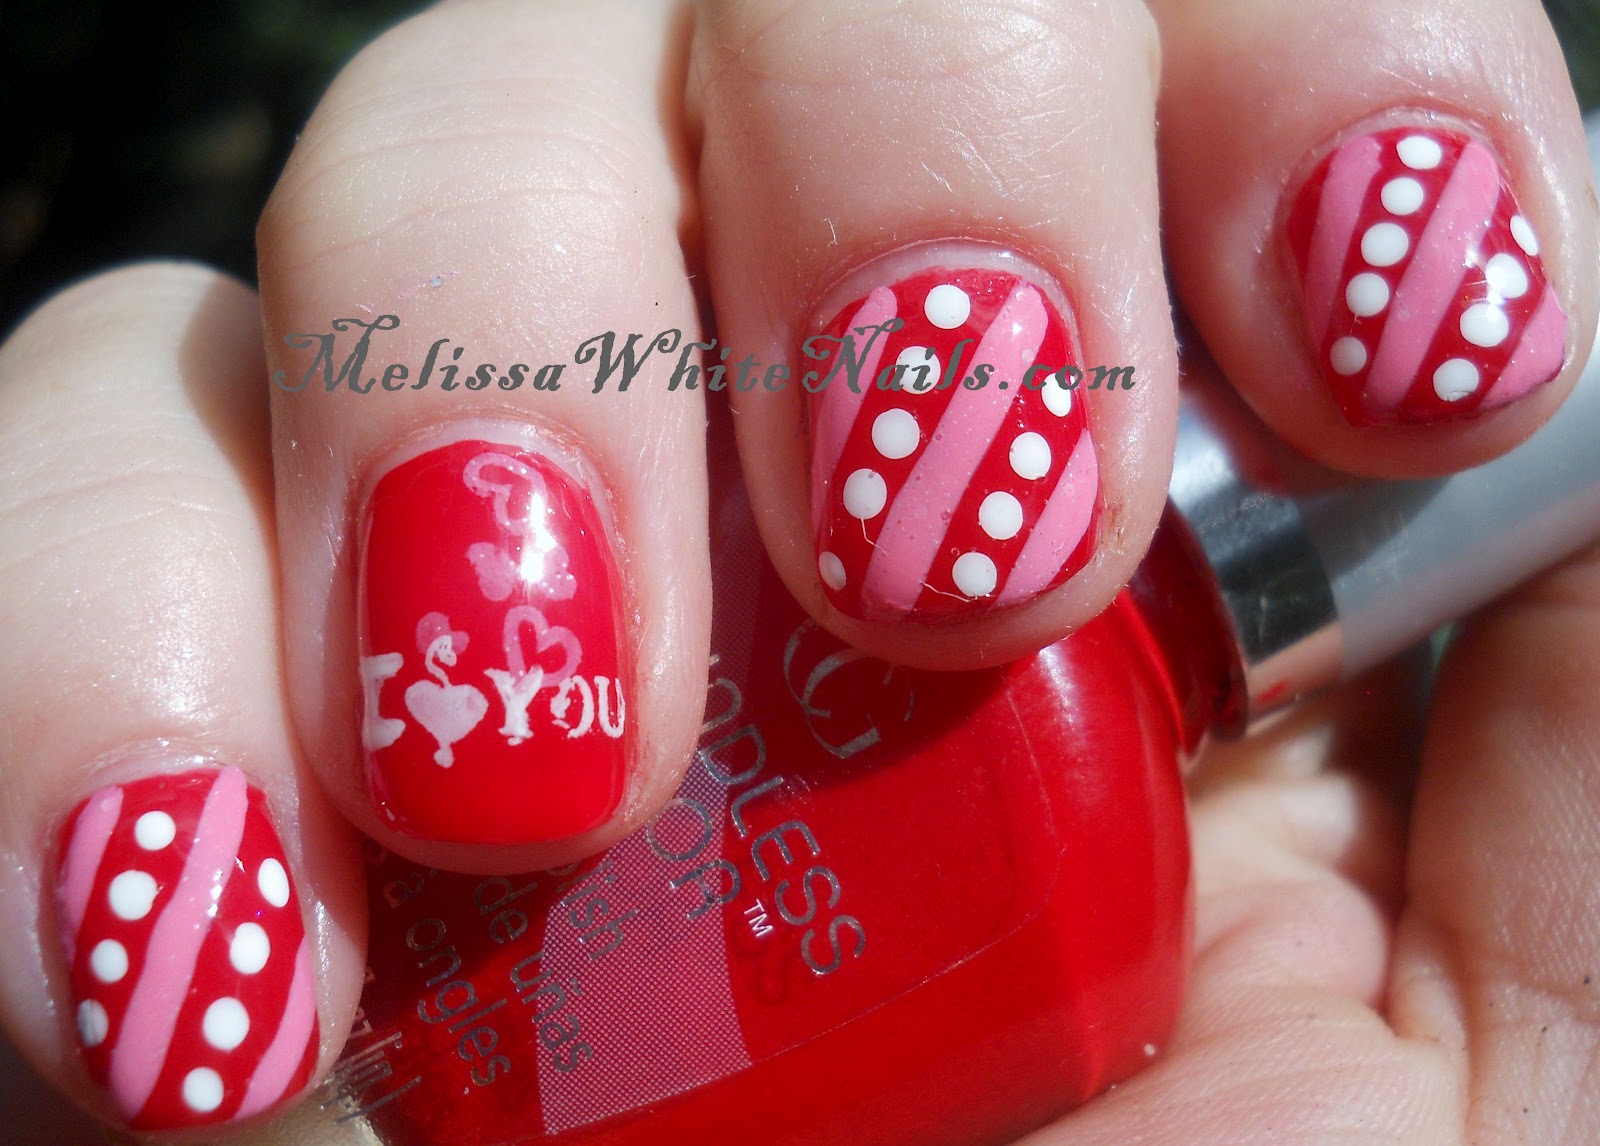 Adventures of a Nail Tech: February 2012